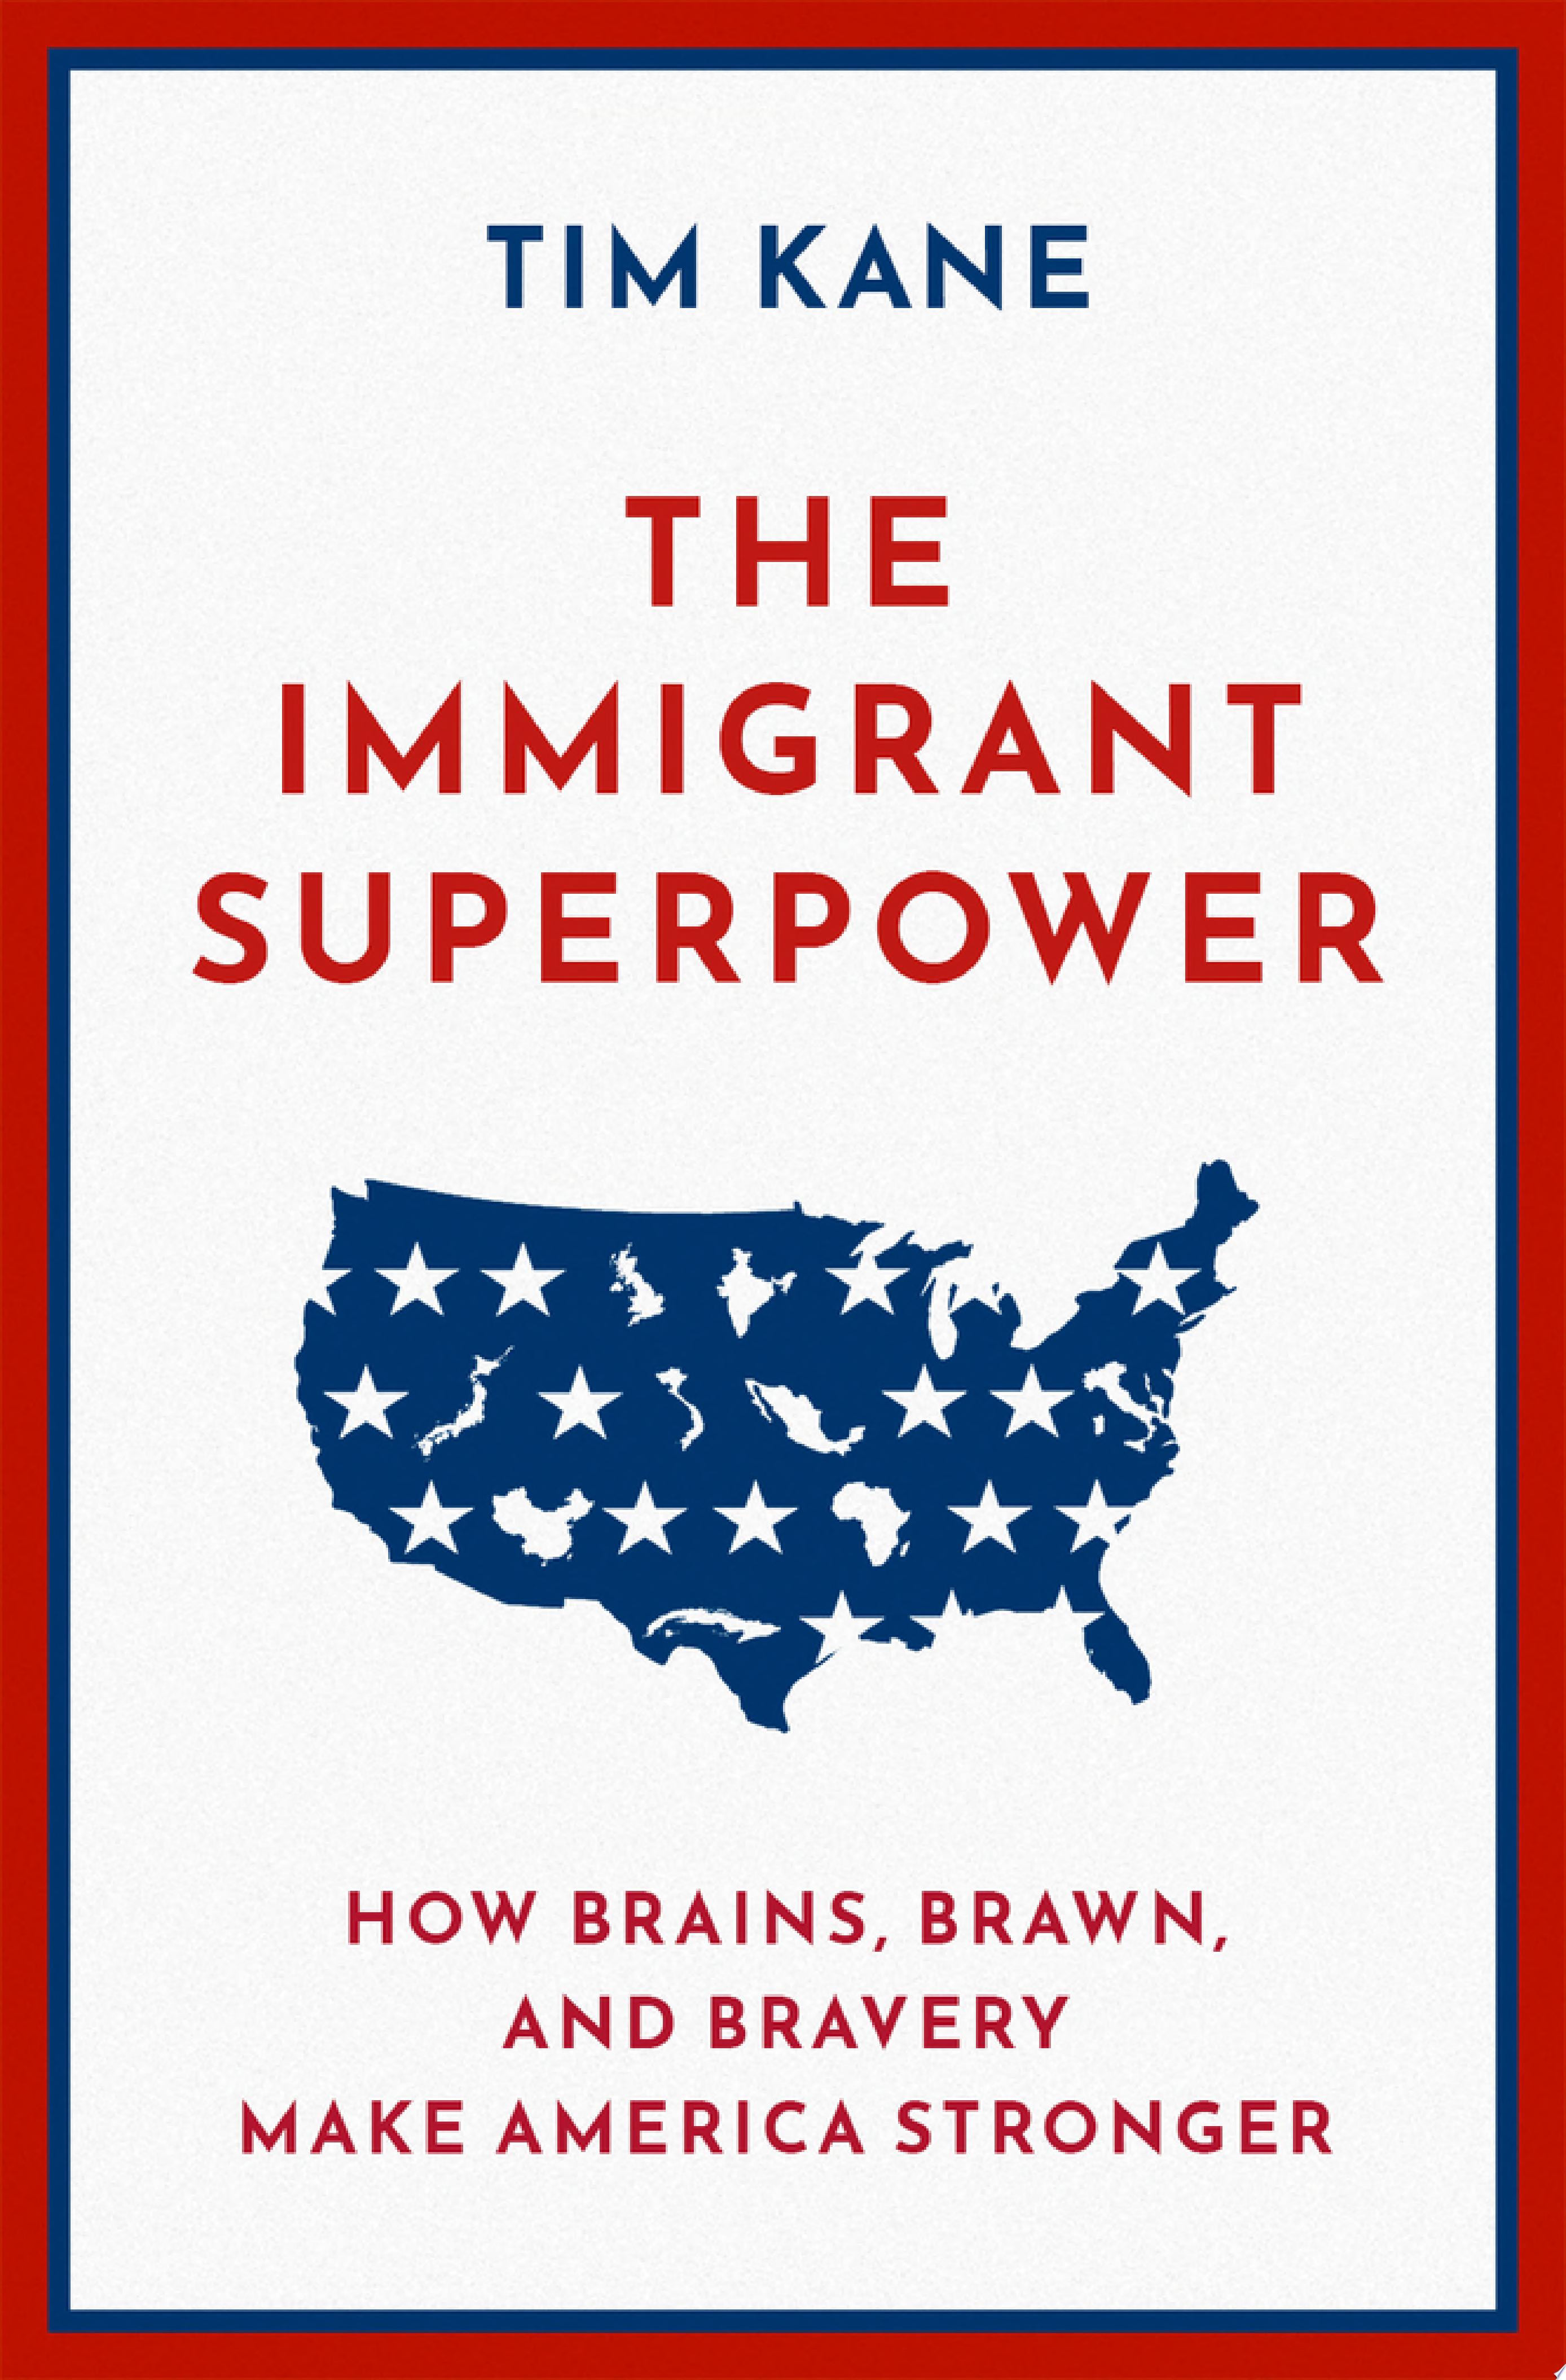 Image for "The Immigrant Superpower"